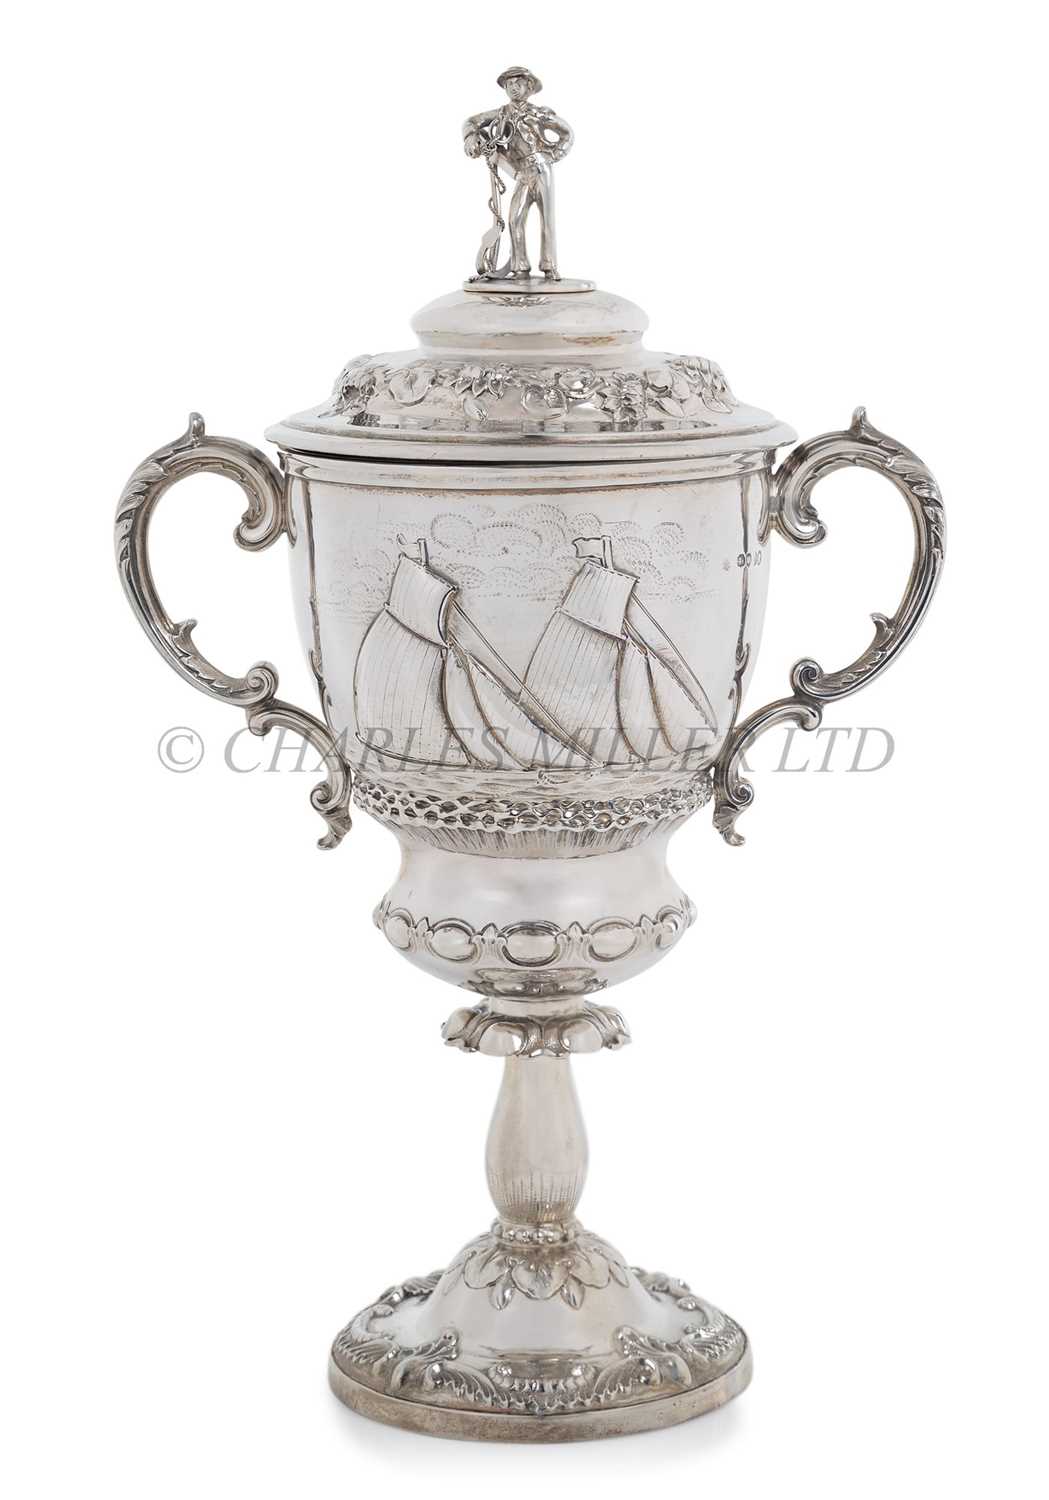 Lot 32 - A 19TH CENTURY SILVER YACHTING TROPHY